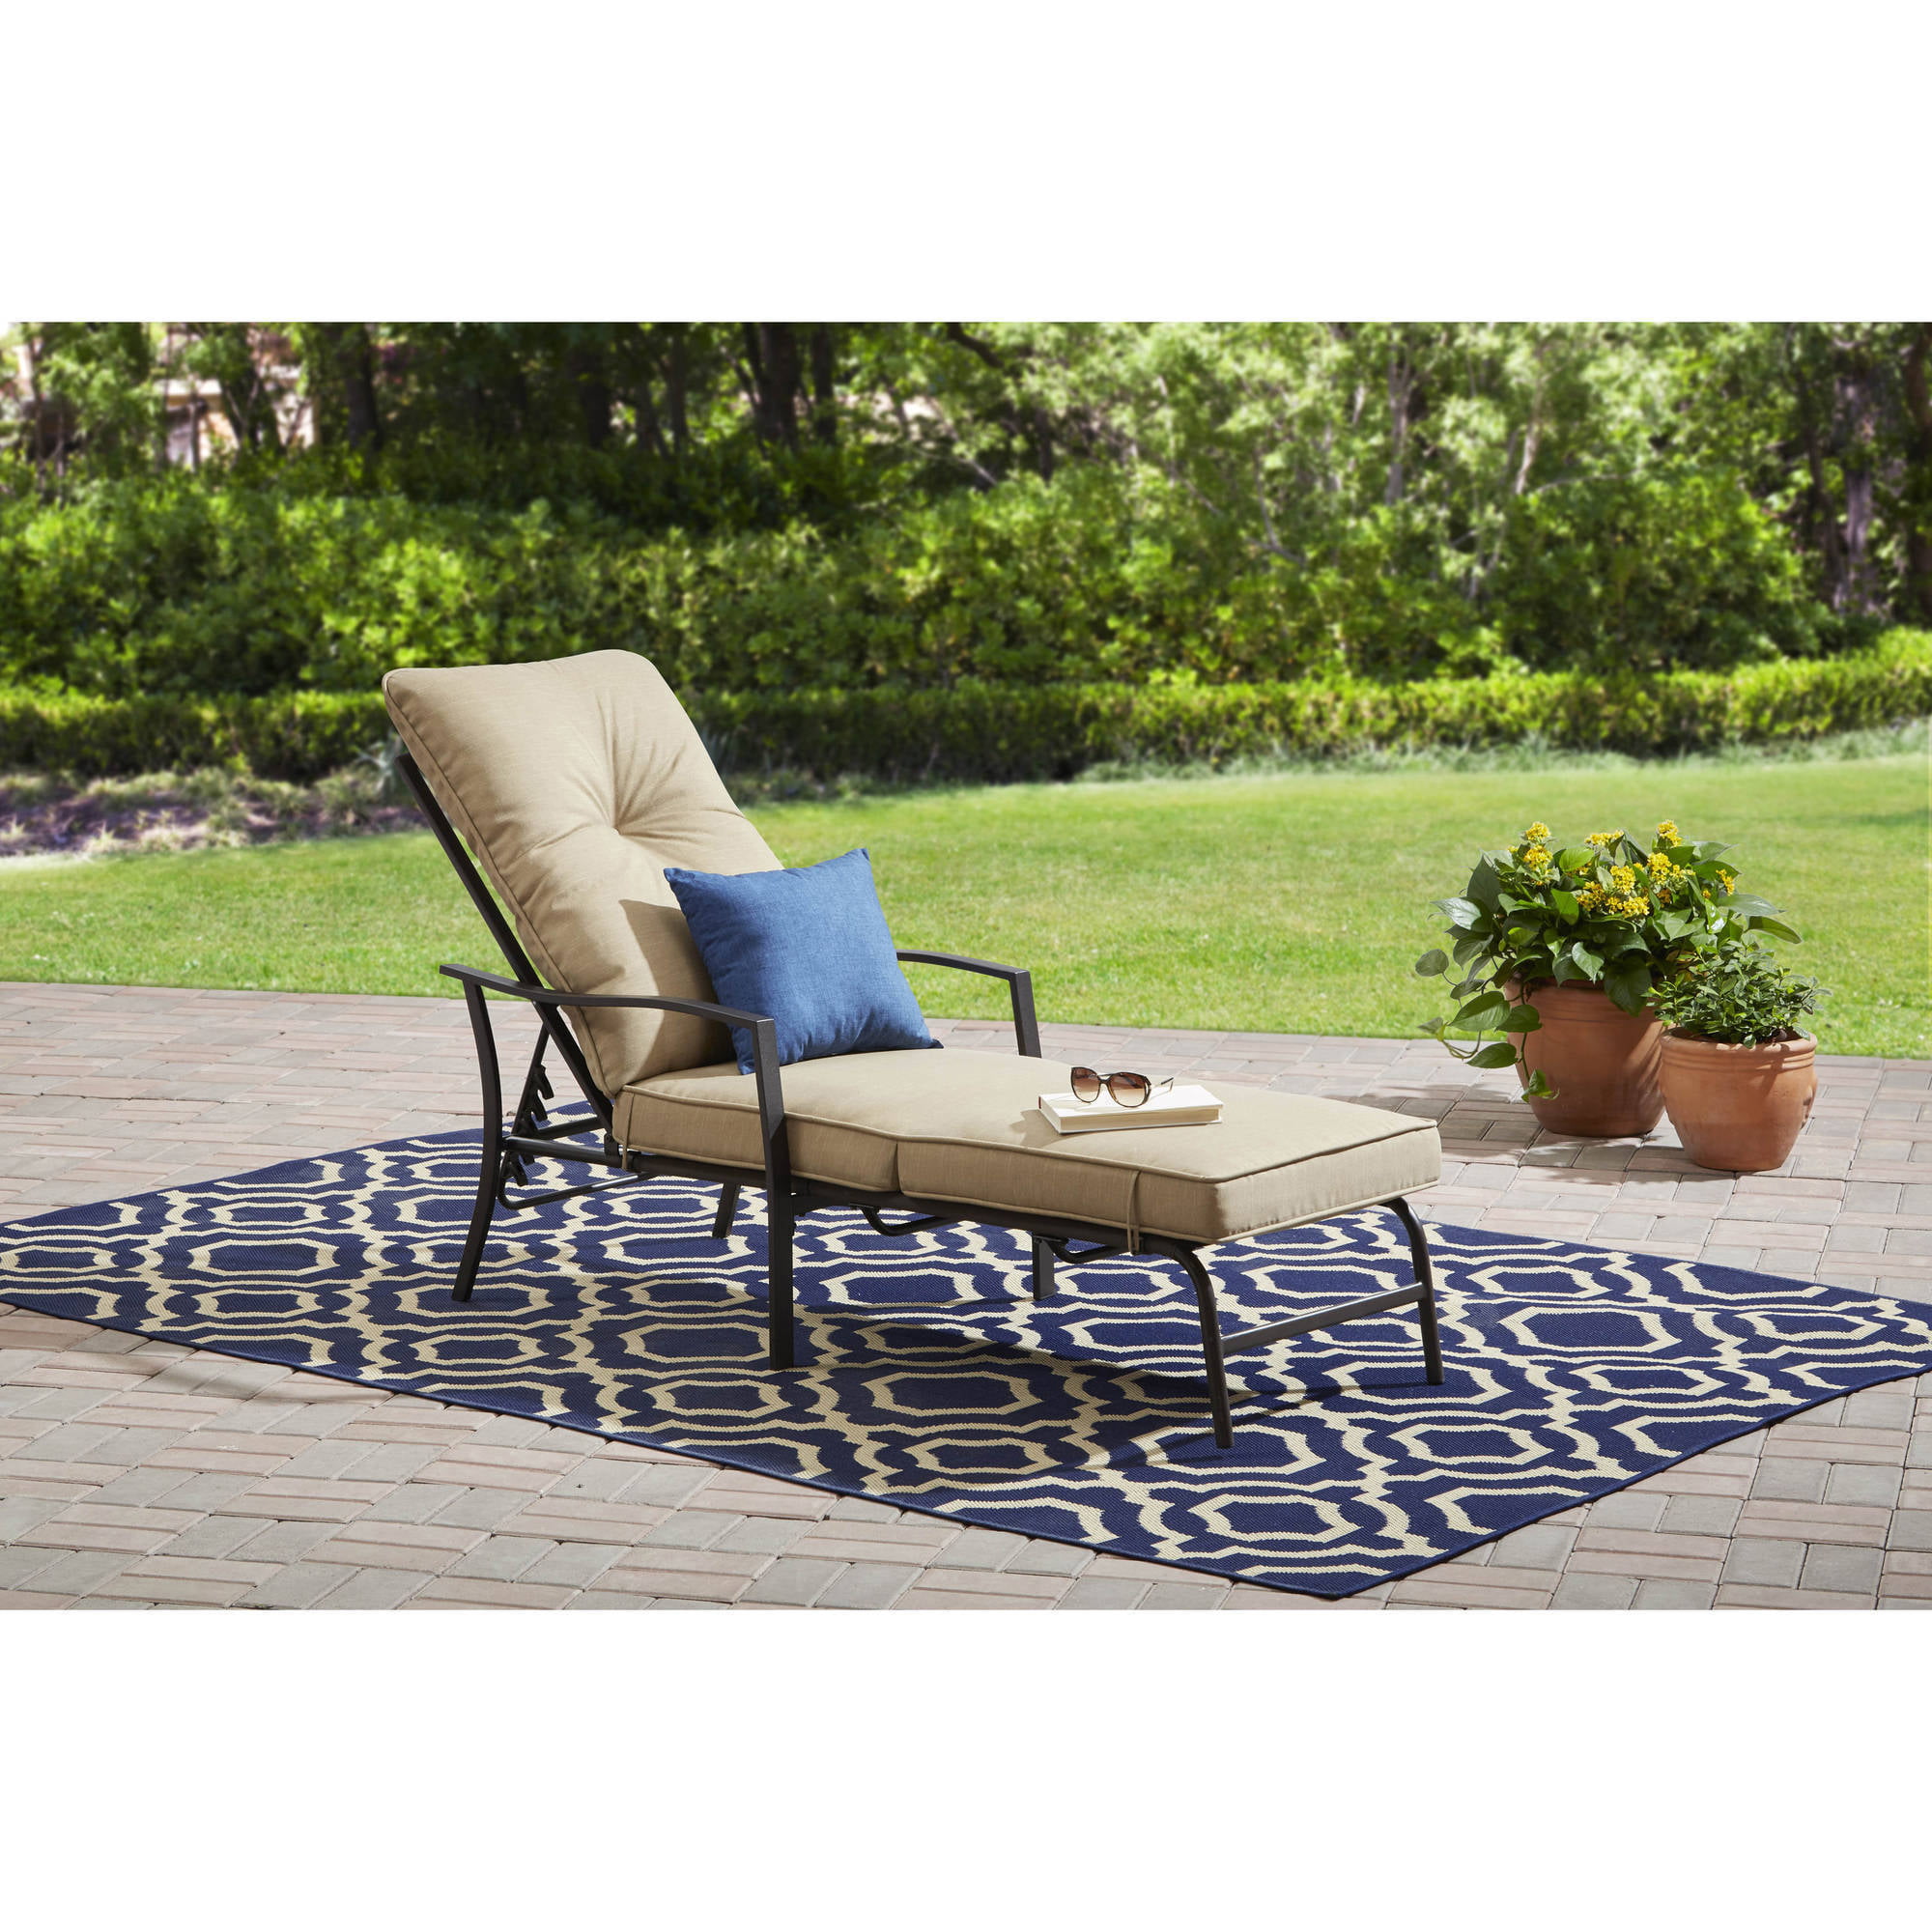 Mainstays Forest Hills Outdoor Chaise Lounge, Espresso ...